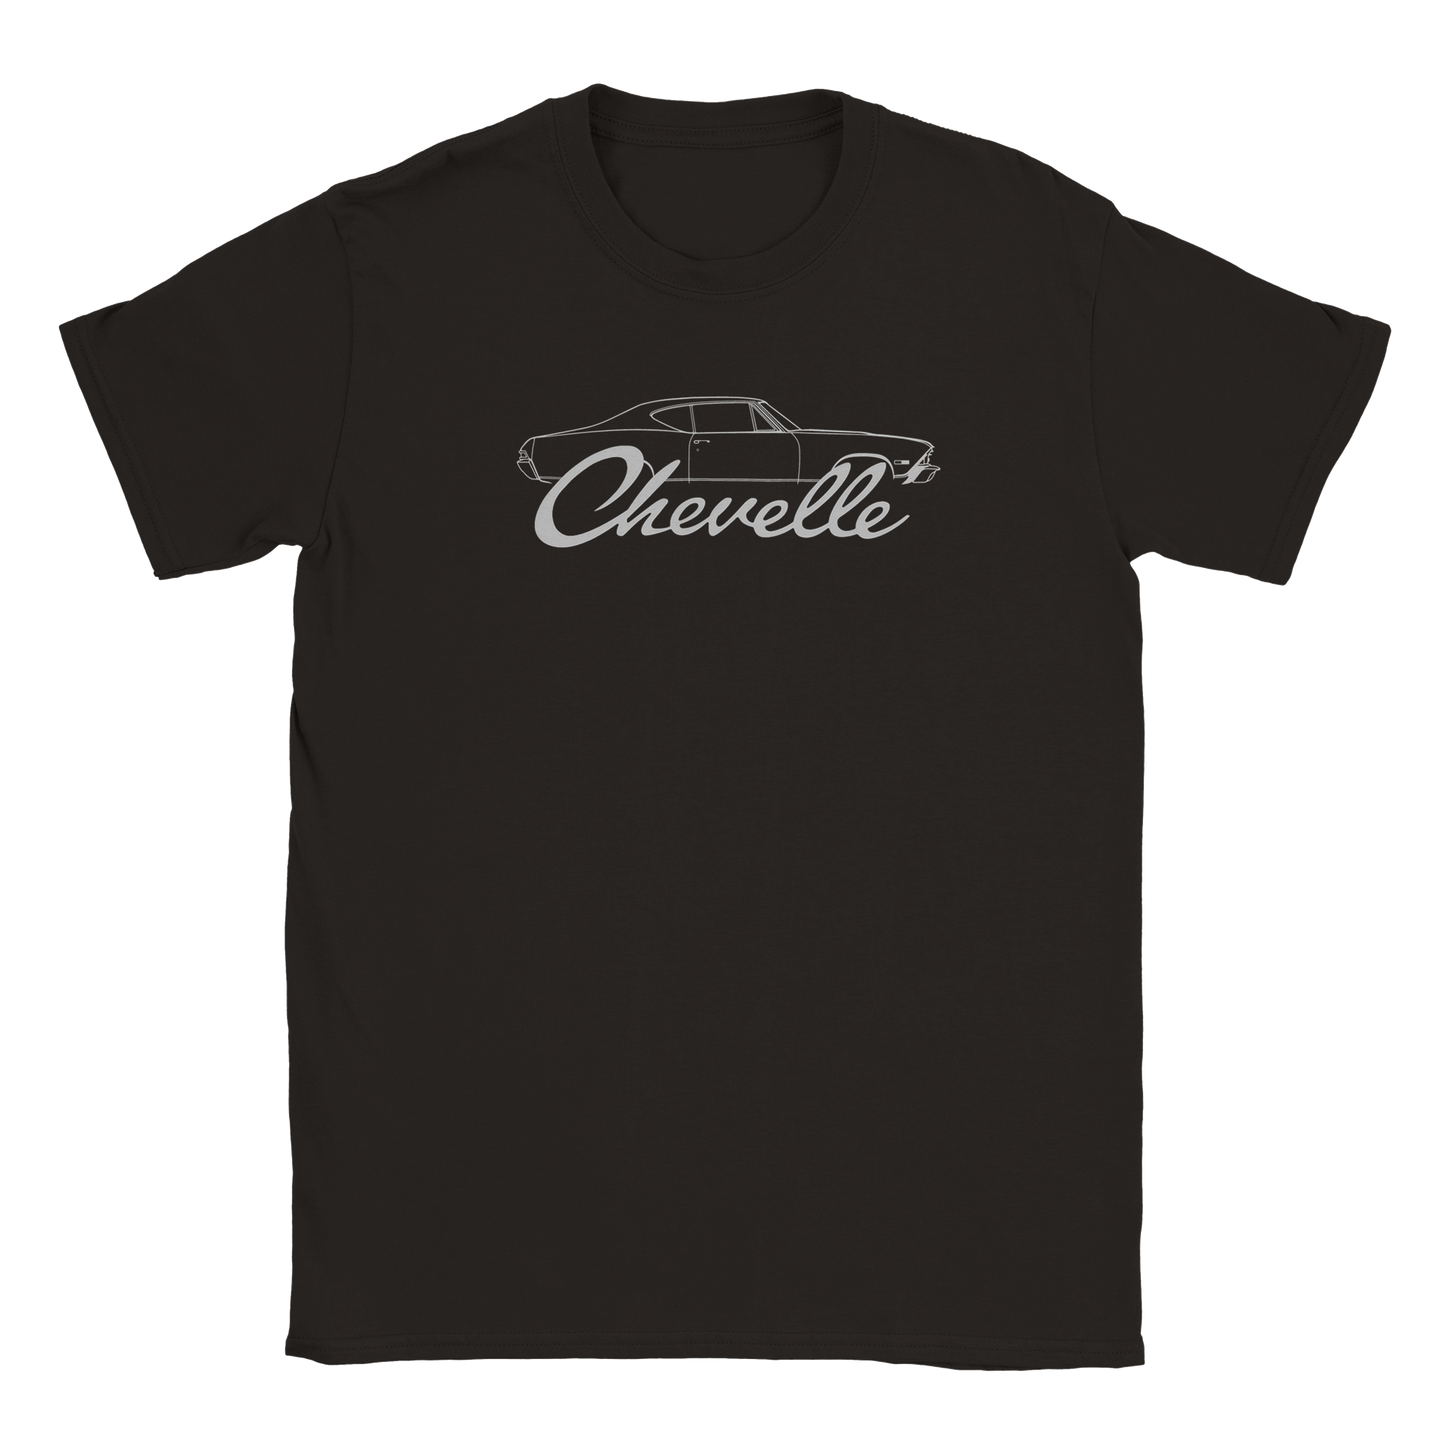 a black t - shirt with the chevrolet logo on it